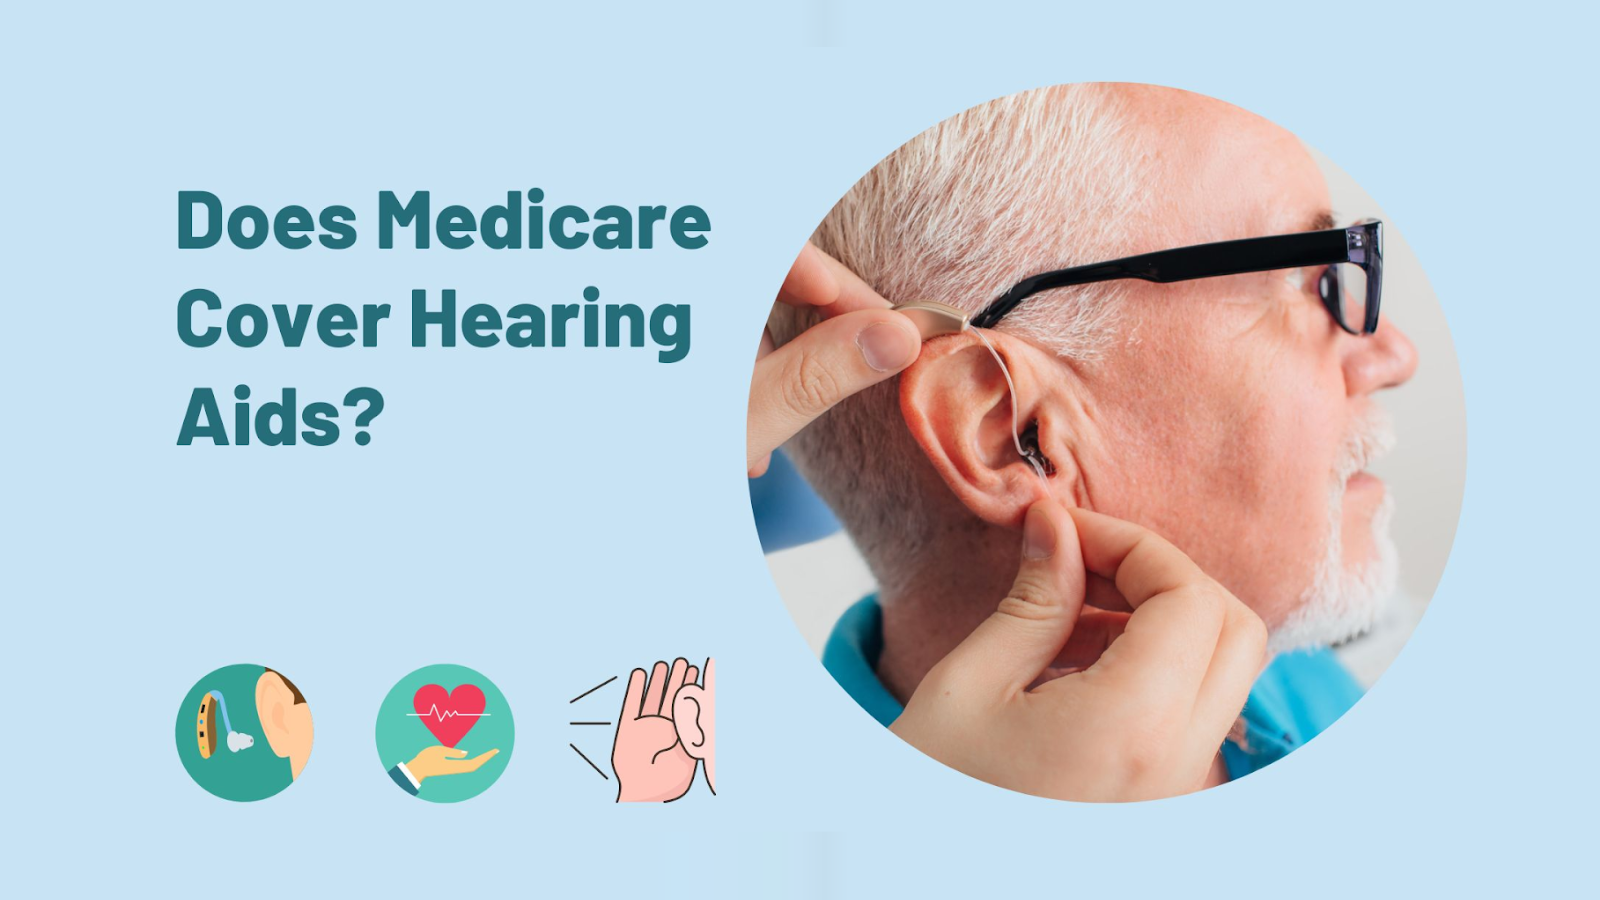 Does Medicare Cover Hearing Aids? Best and 1 Hearing Aids Medicare